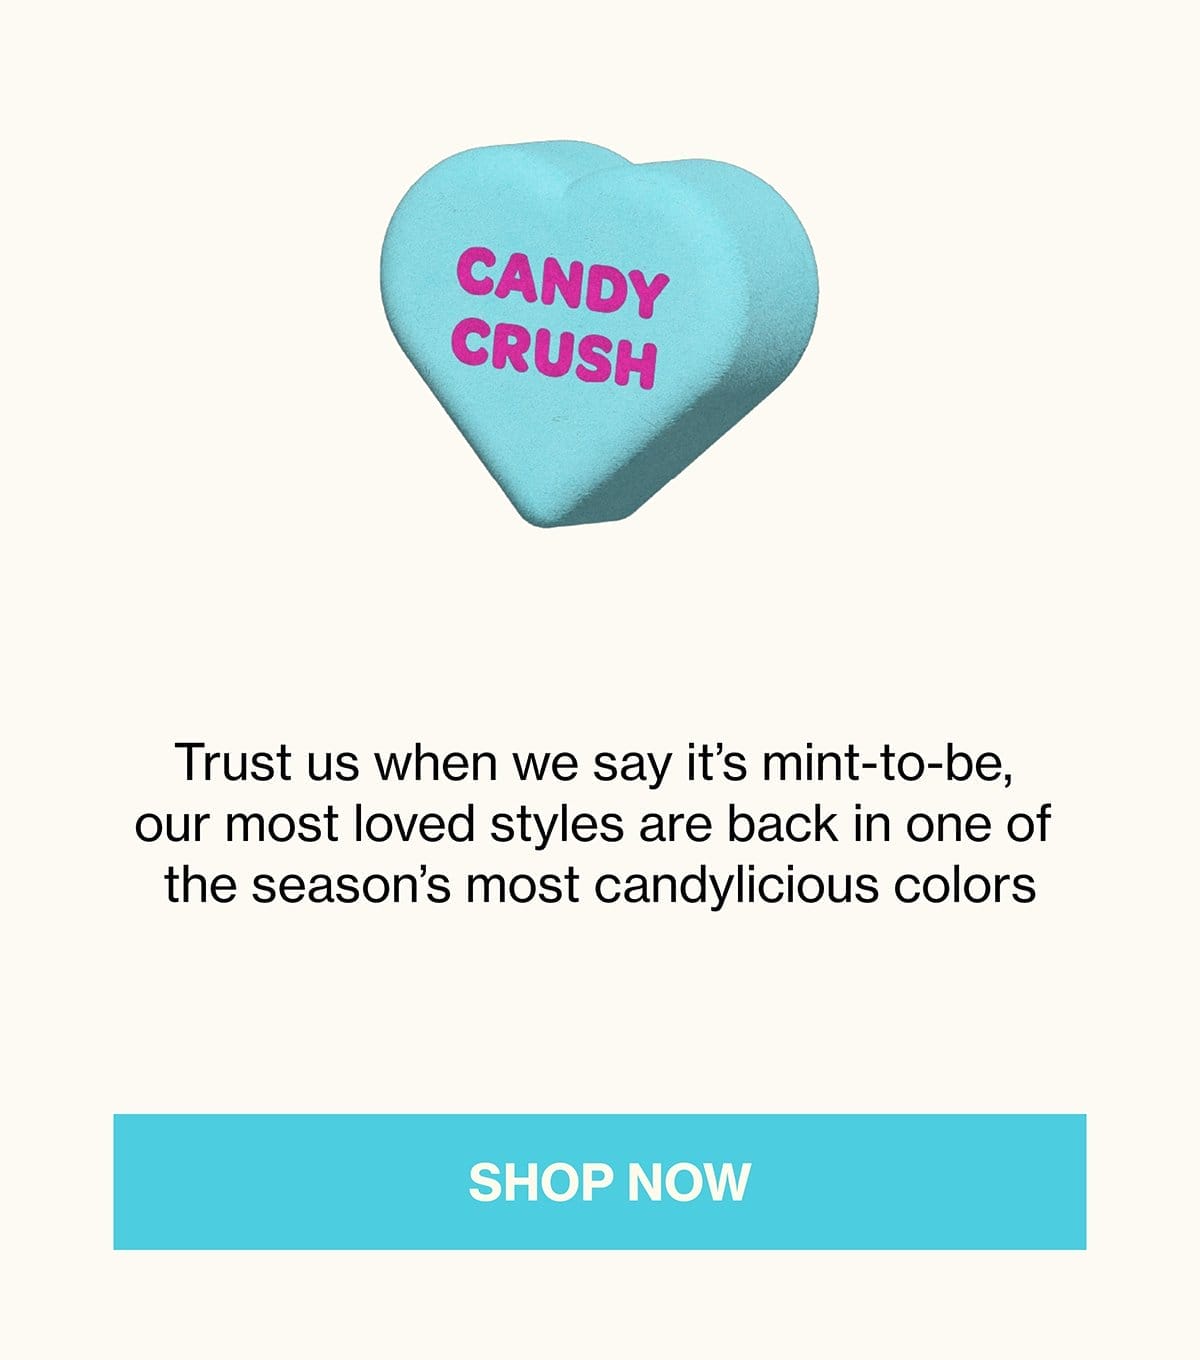 CANDY CRUSH SHOP NOW